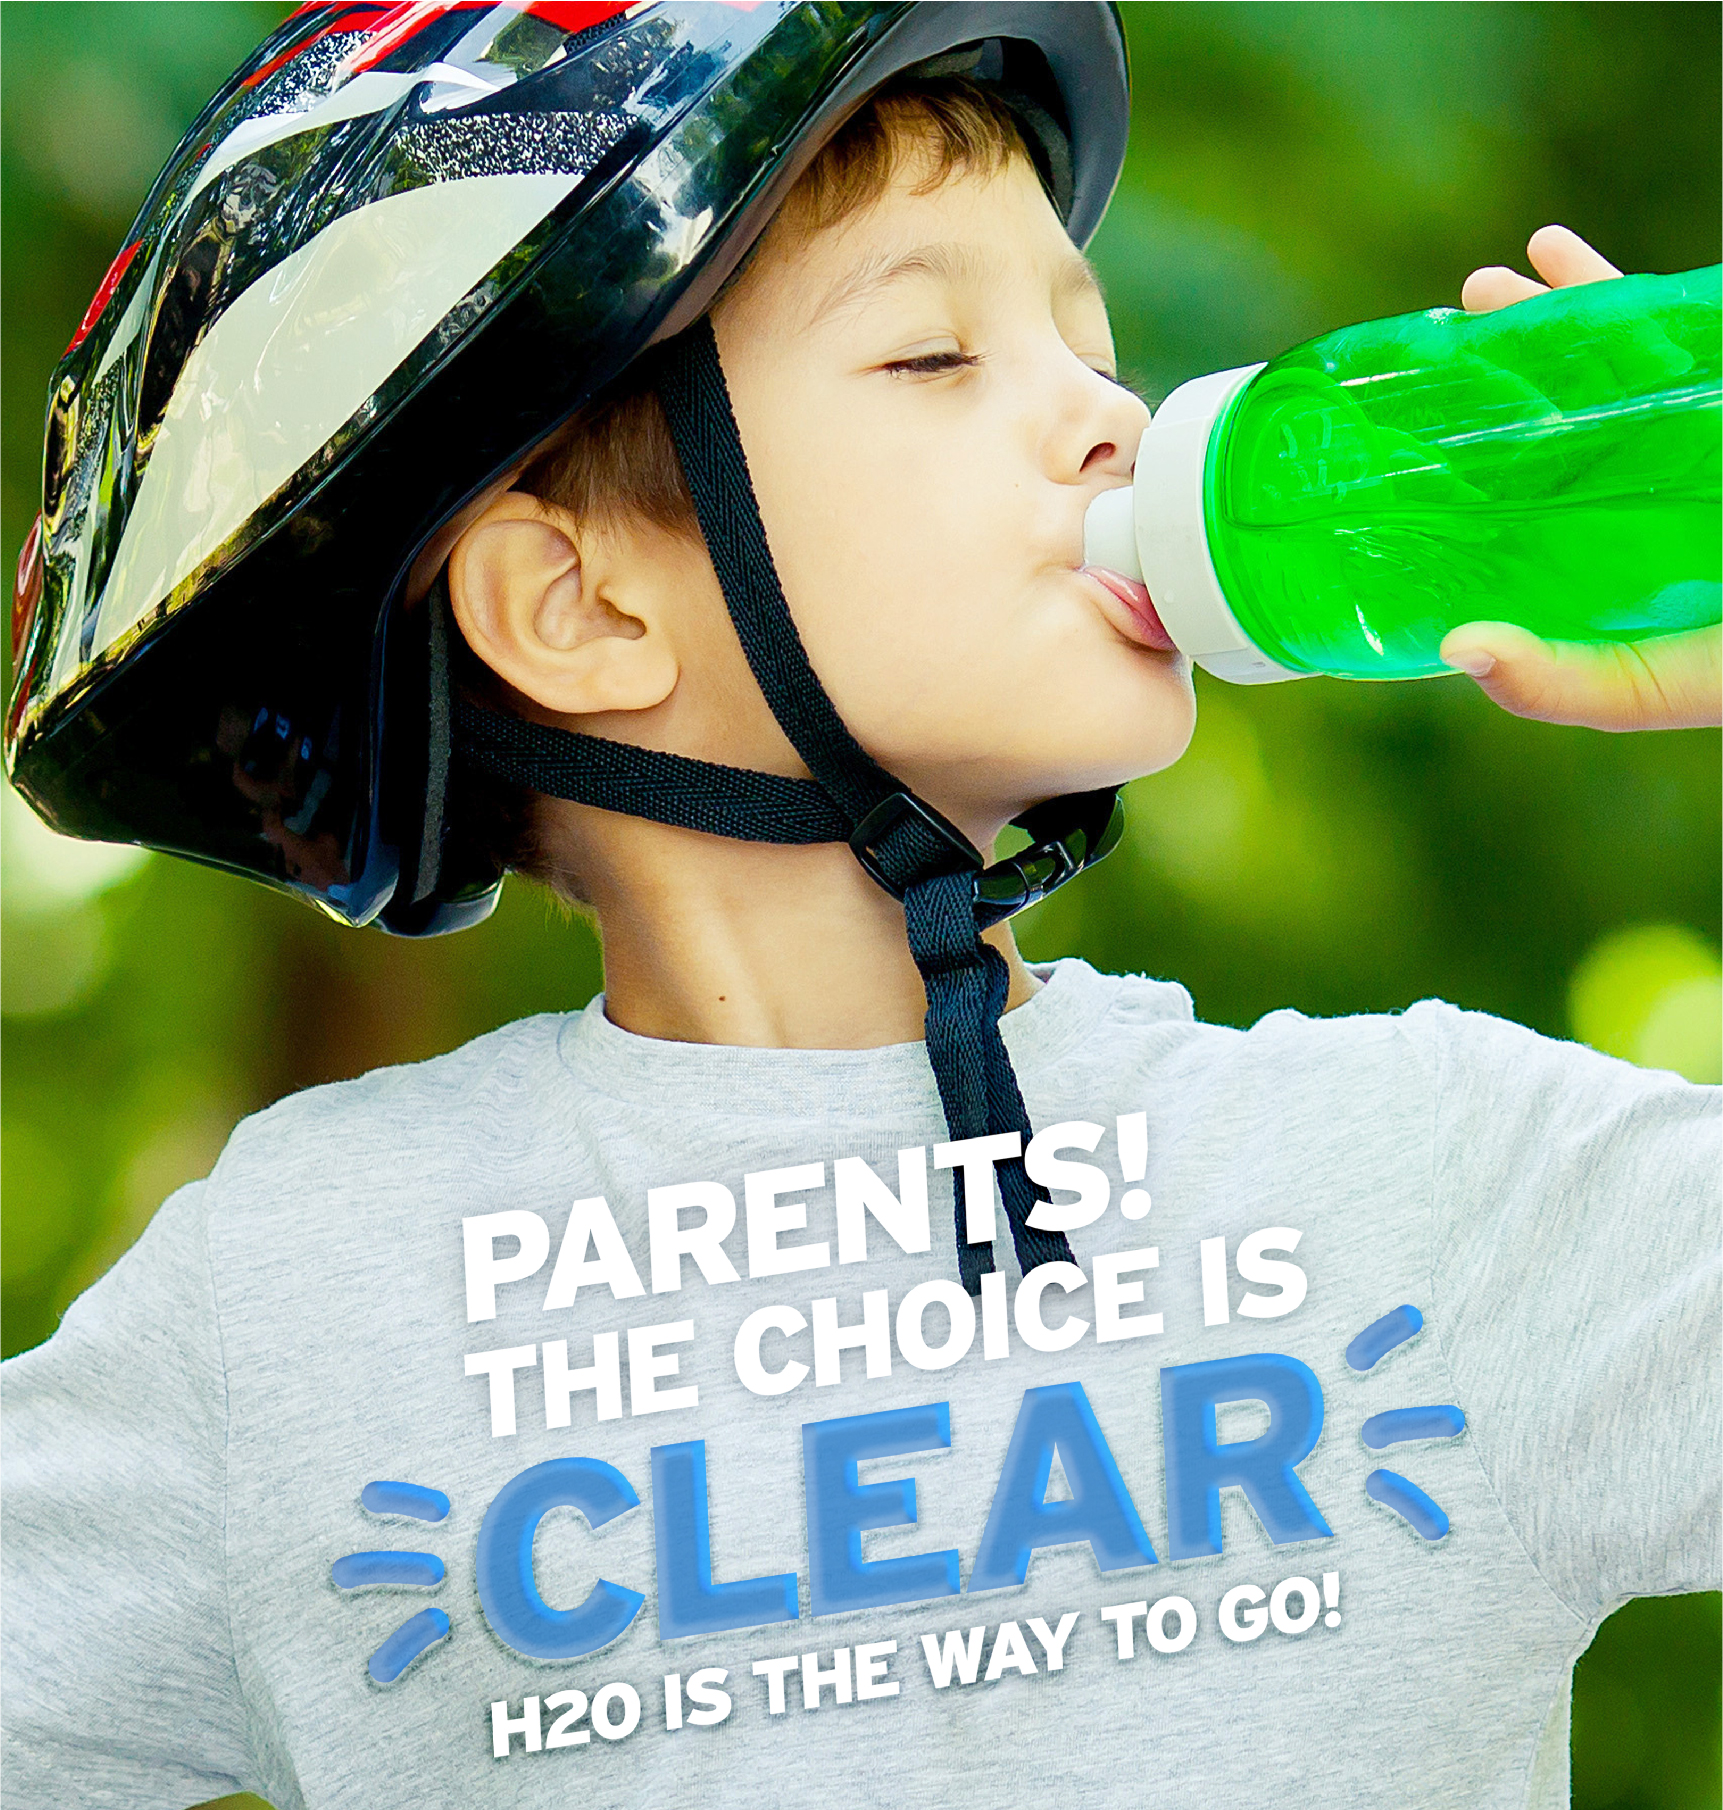 New Toolkit Helps Latino Parents See the Harm of Sugary Fruit Drinks